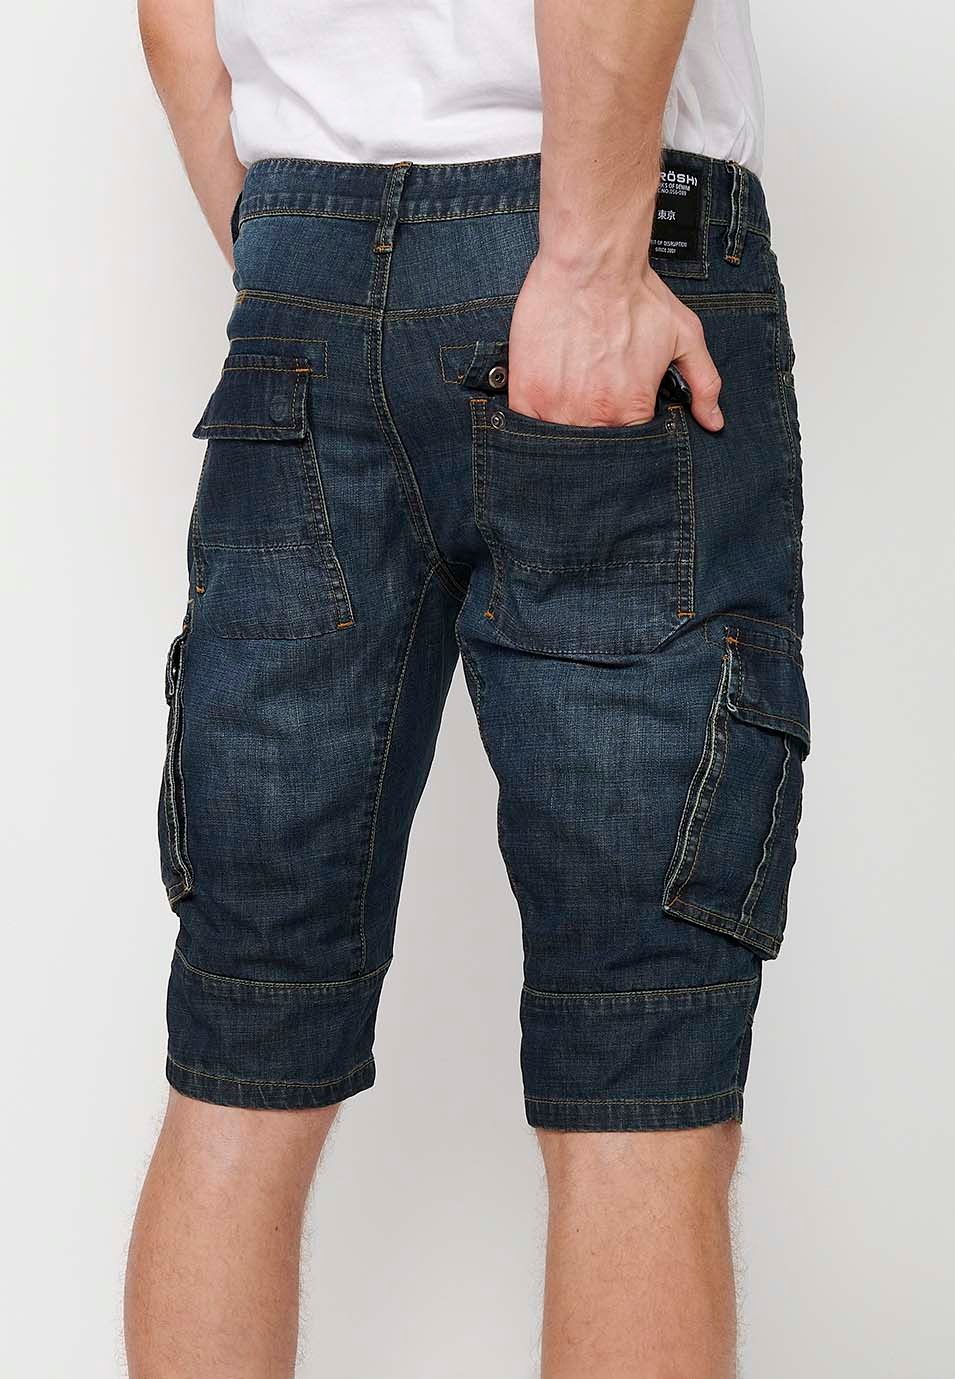 Cotton Pirate Denim Bermuda Shorts with Side Pockets and Front Closure with Zipper and Button in Blue for Men 5